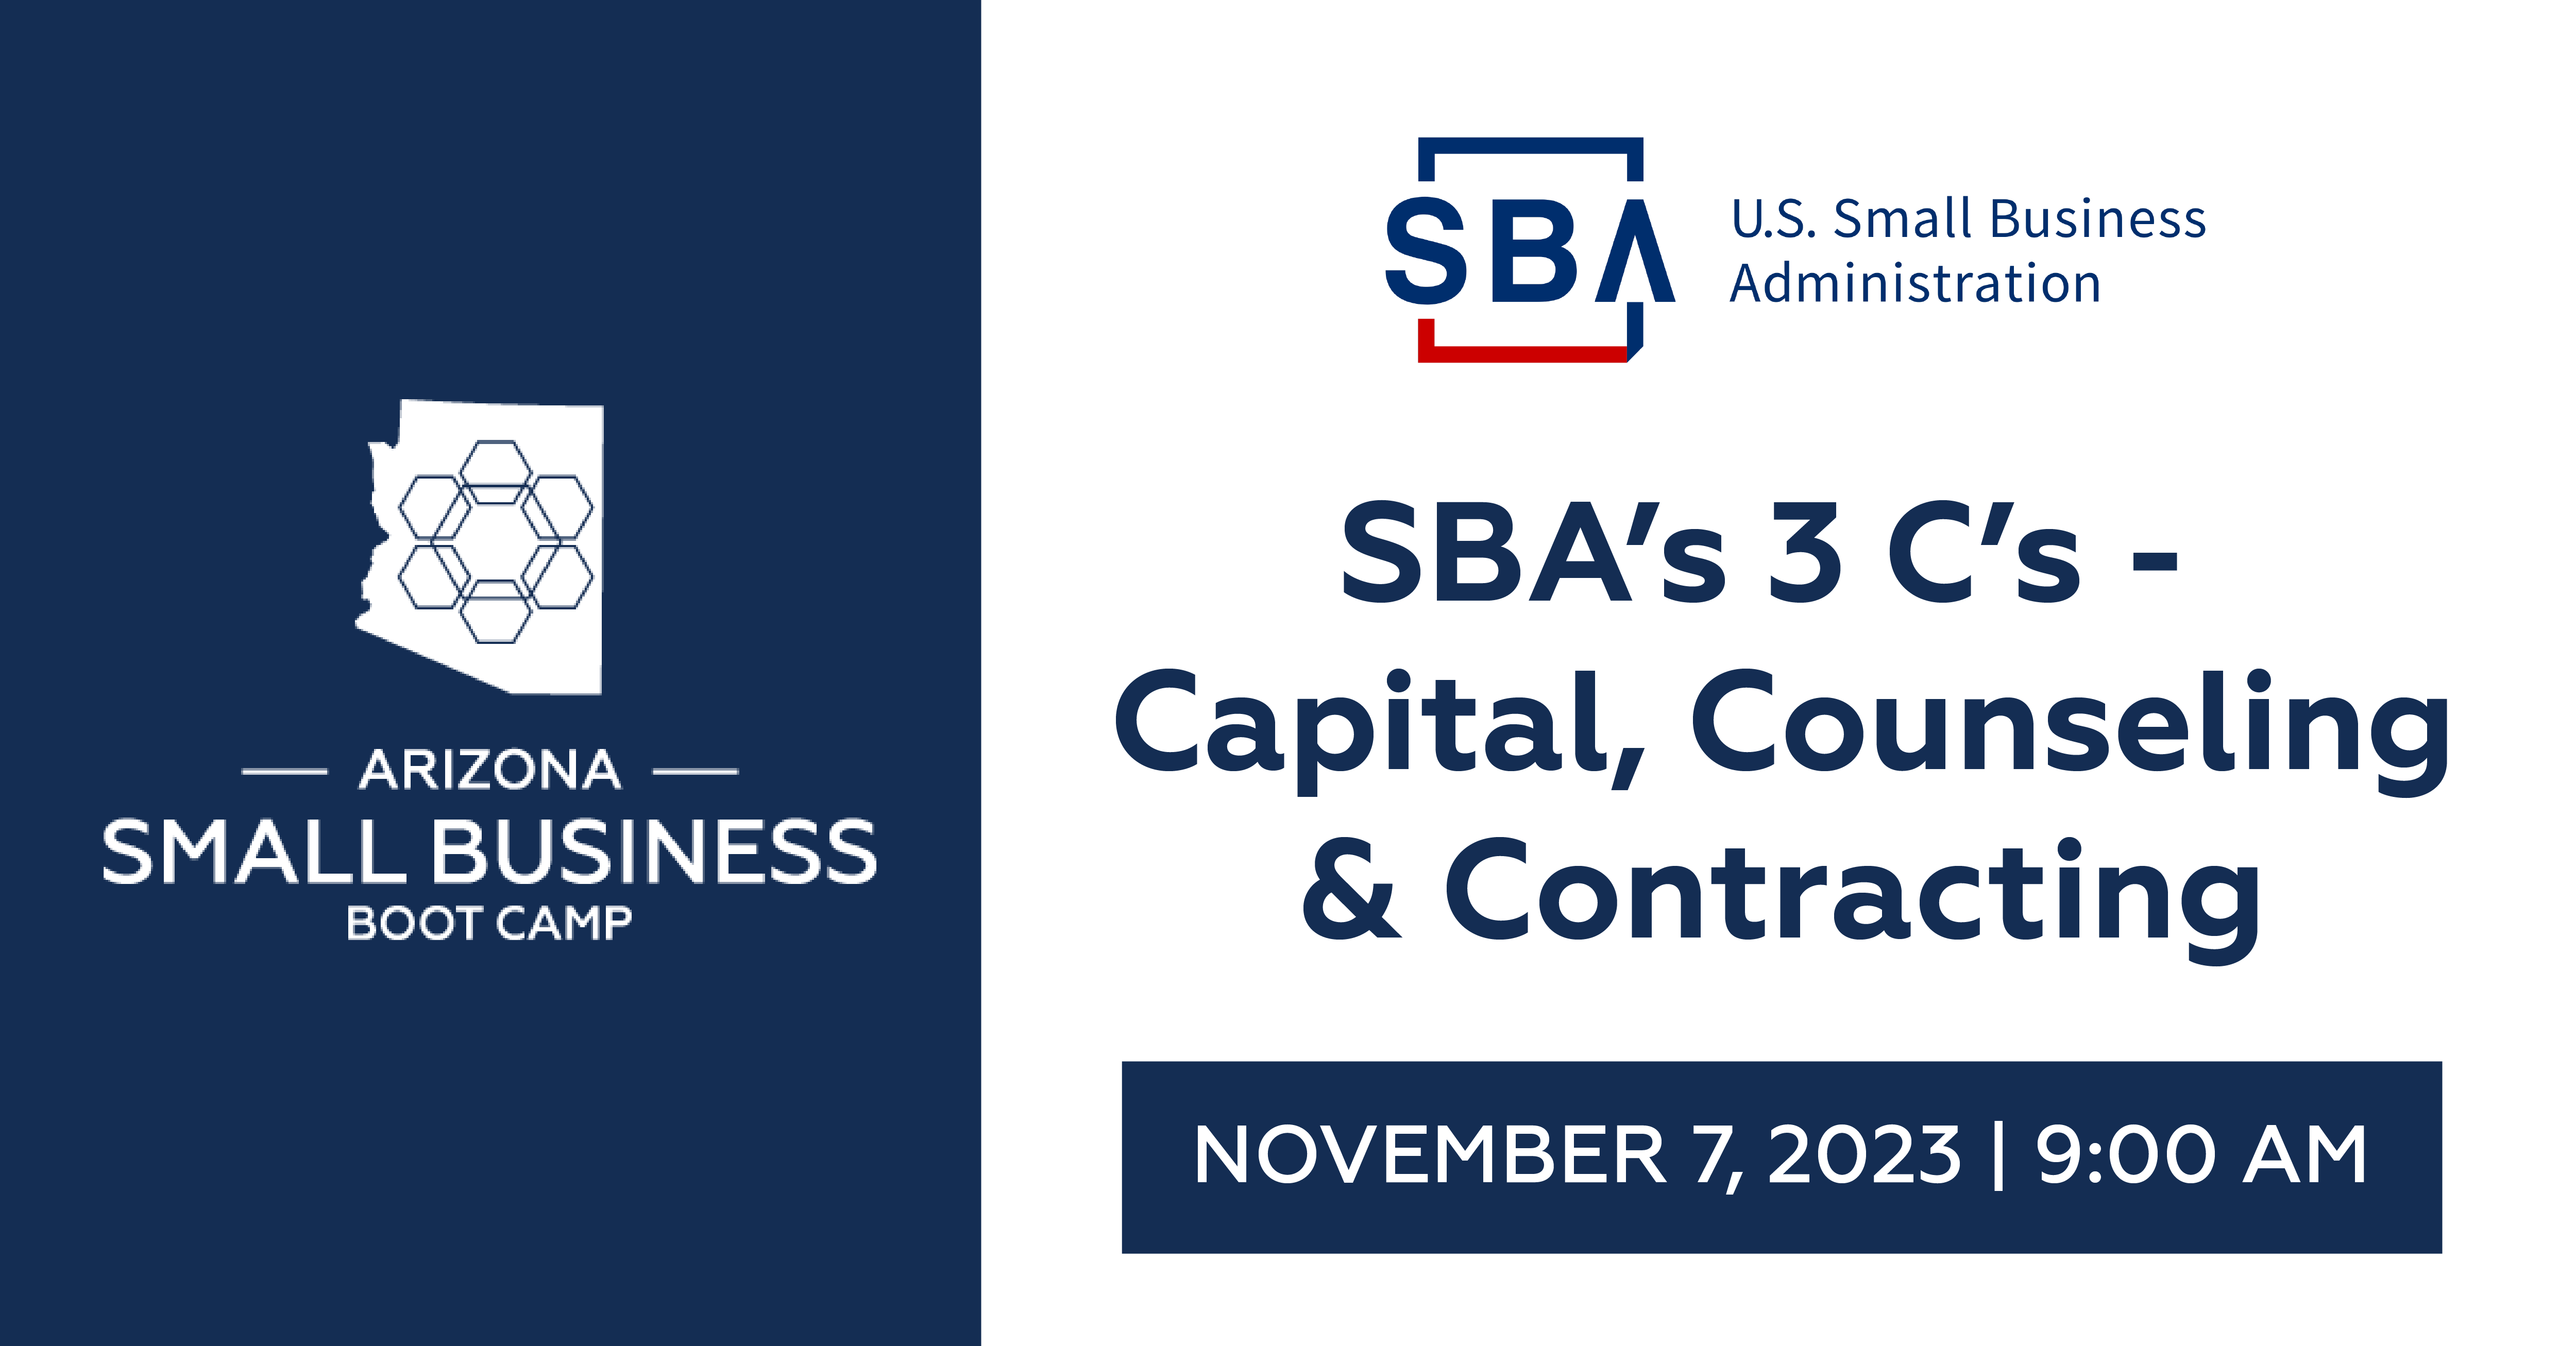 SBA’s 3 C’s - Capital, Counseling, & Contracting